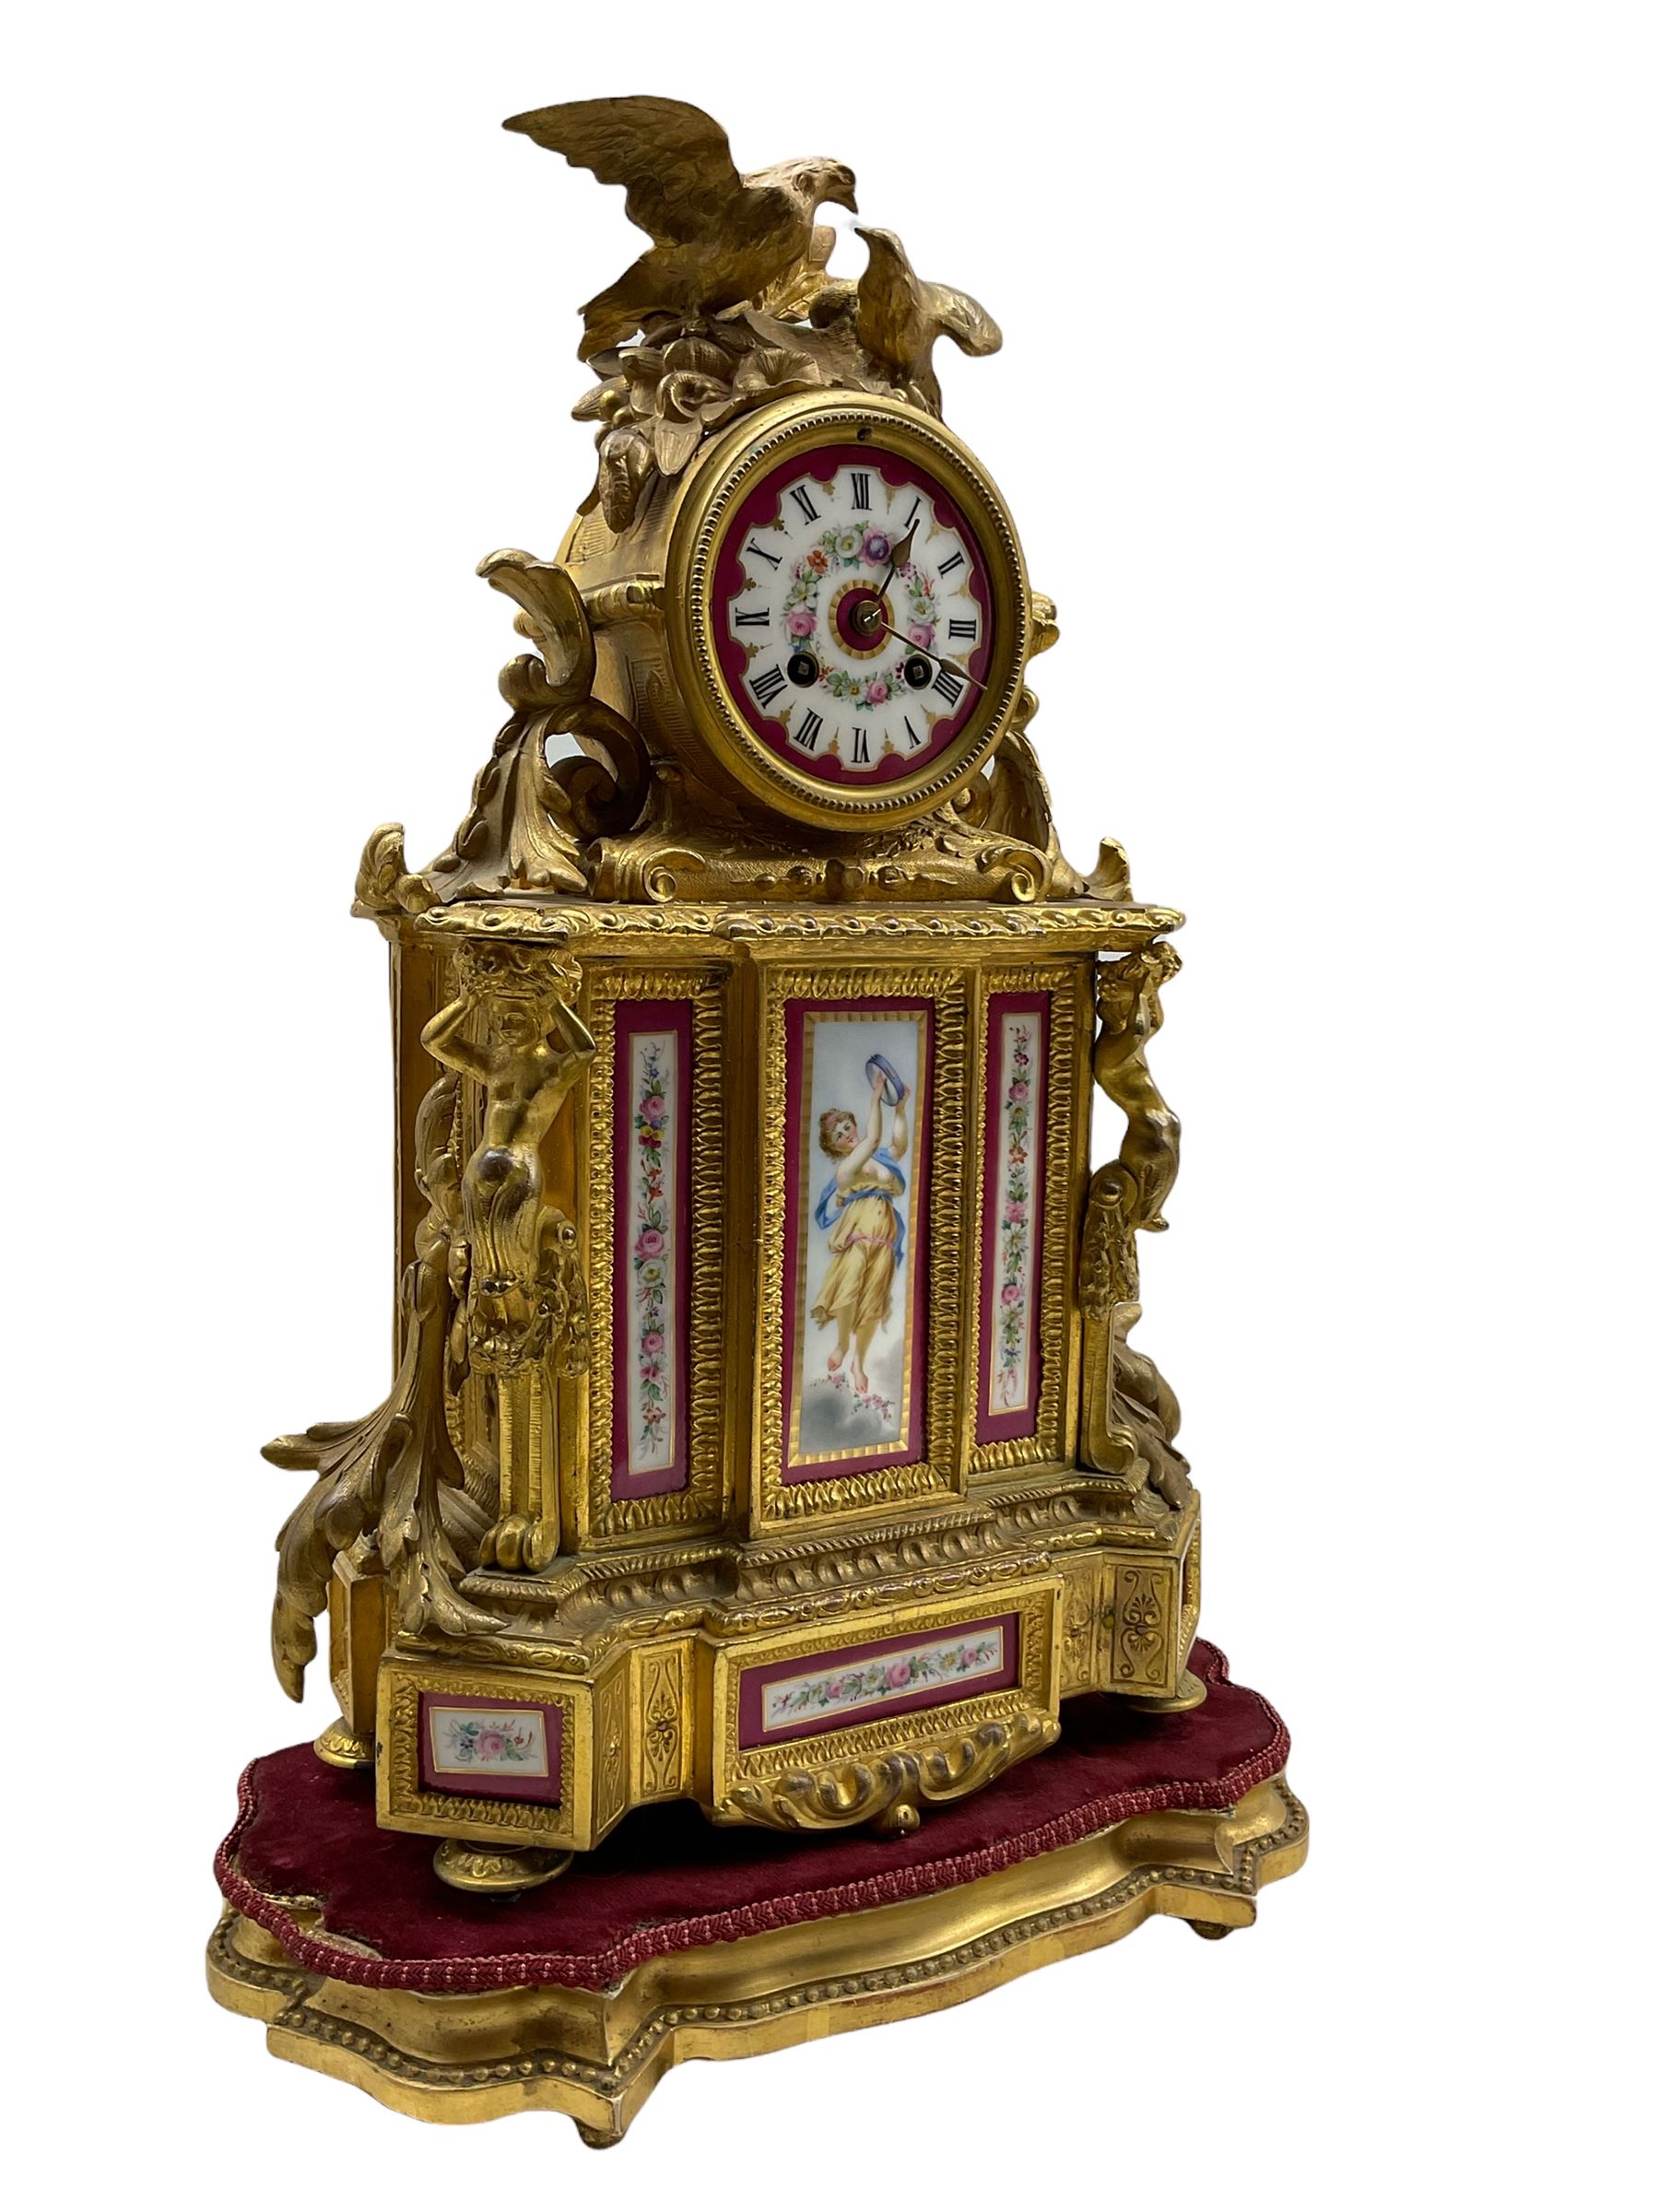 French Napoleon III mantle clock in a gilt speller rococo case surmounted by two birds taking flight - Image 2 of 4